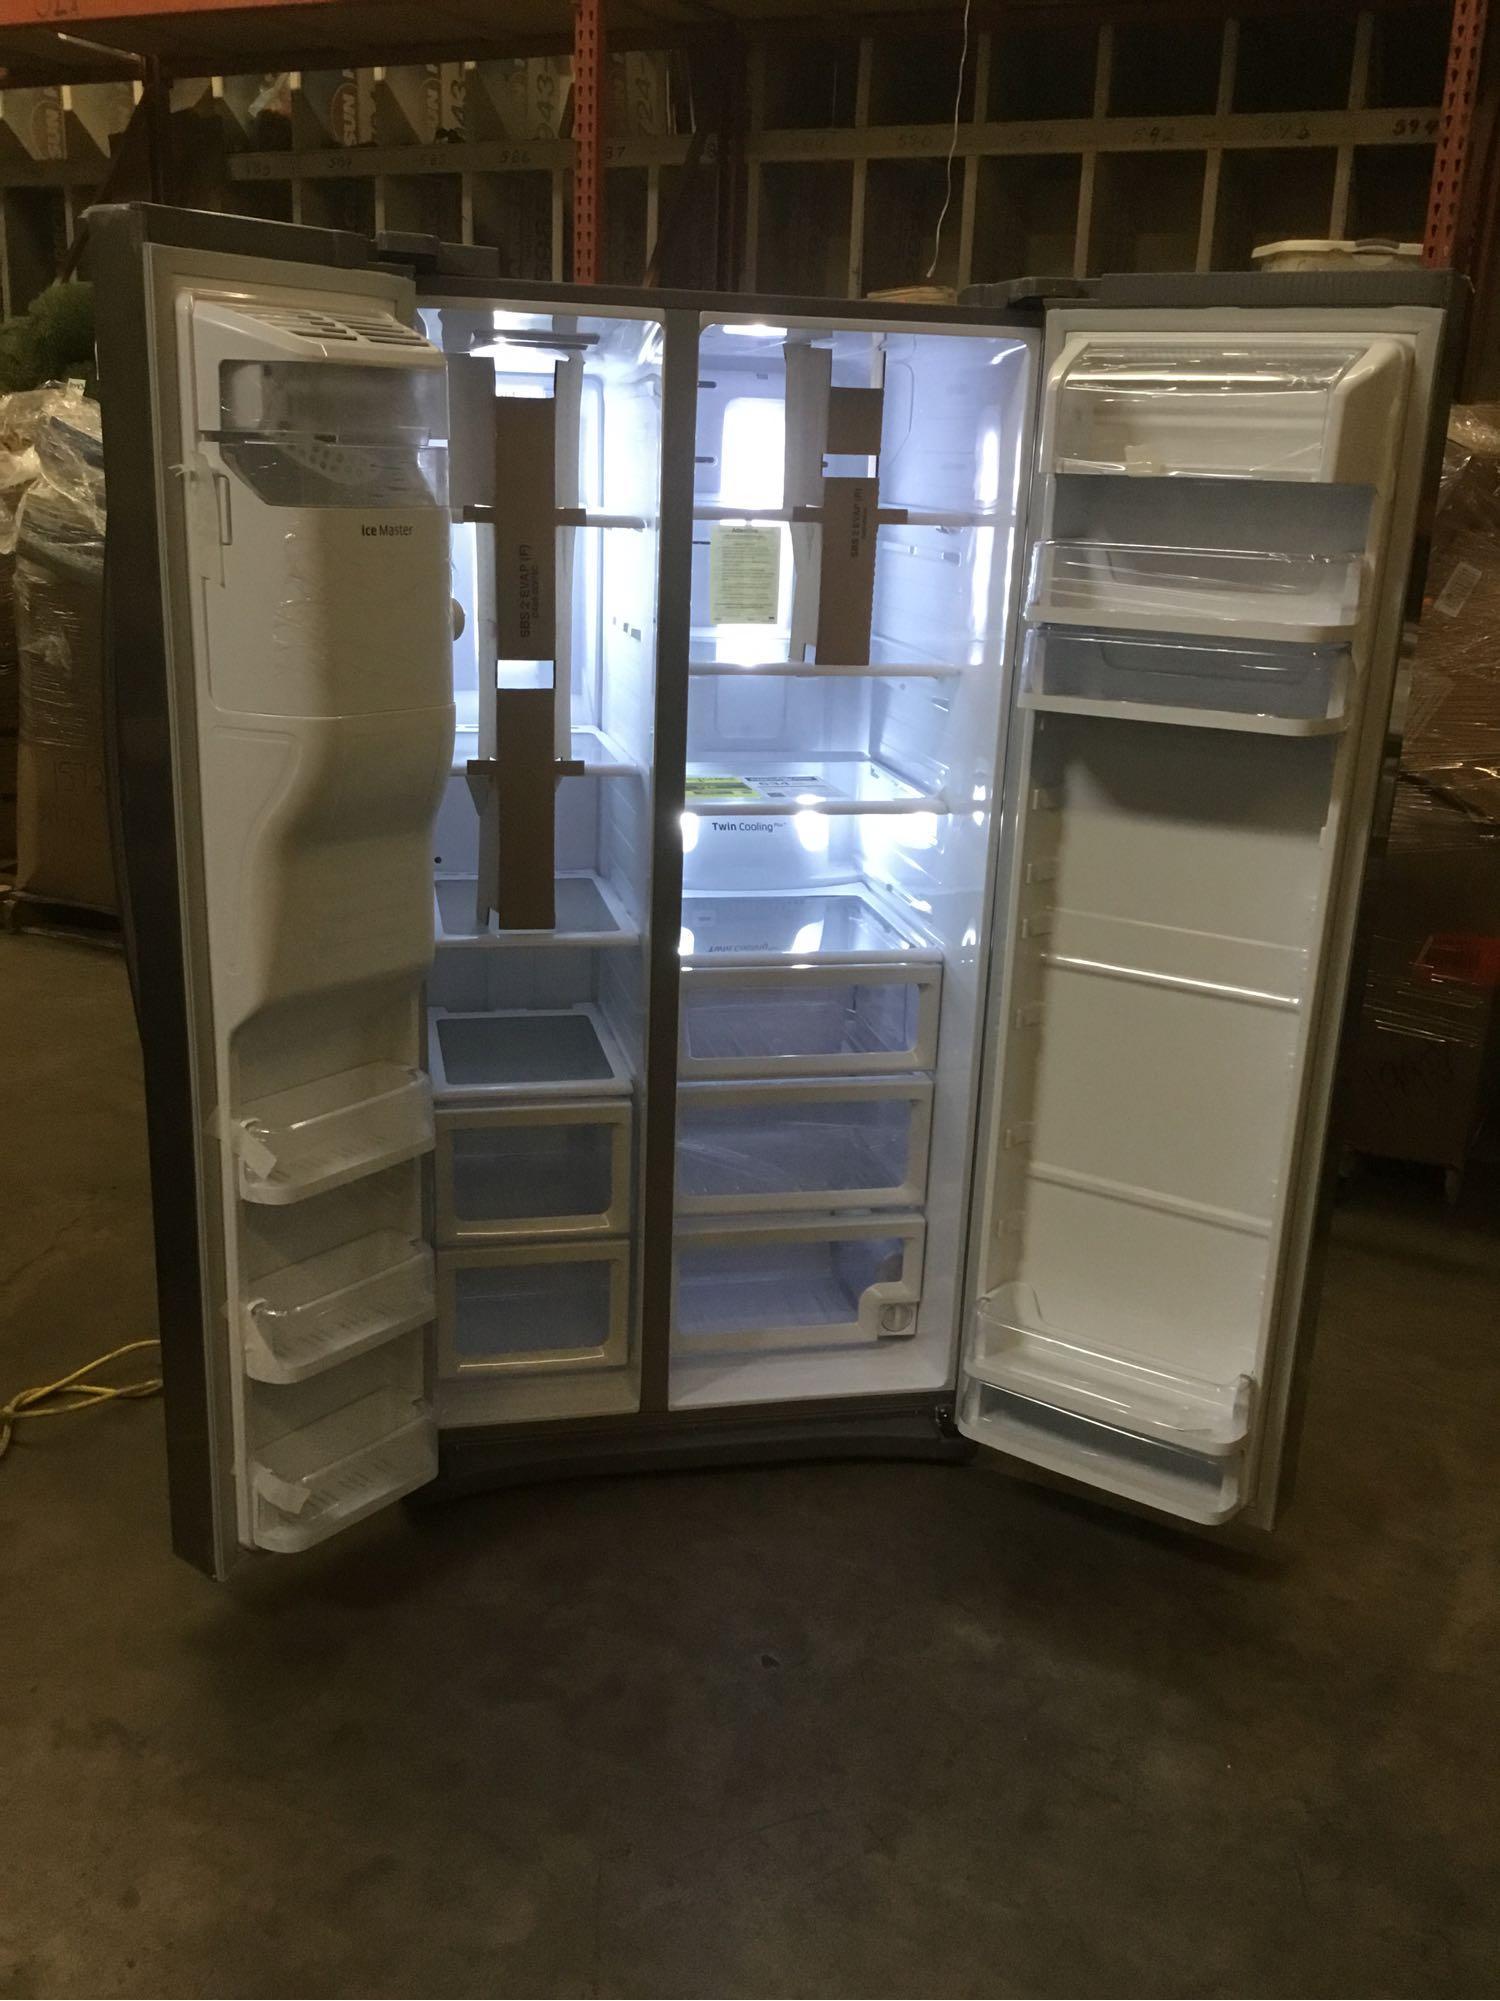 Samsung 24.5 cu. ft. Side-By-Side Refrigerator with In-Door Ice Maker**GETS COLD**